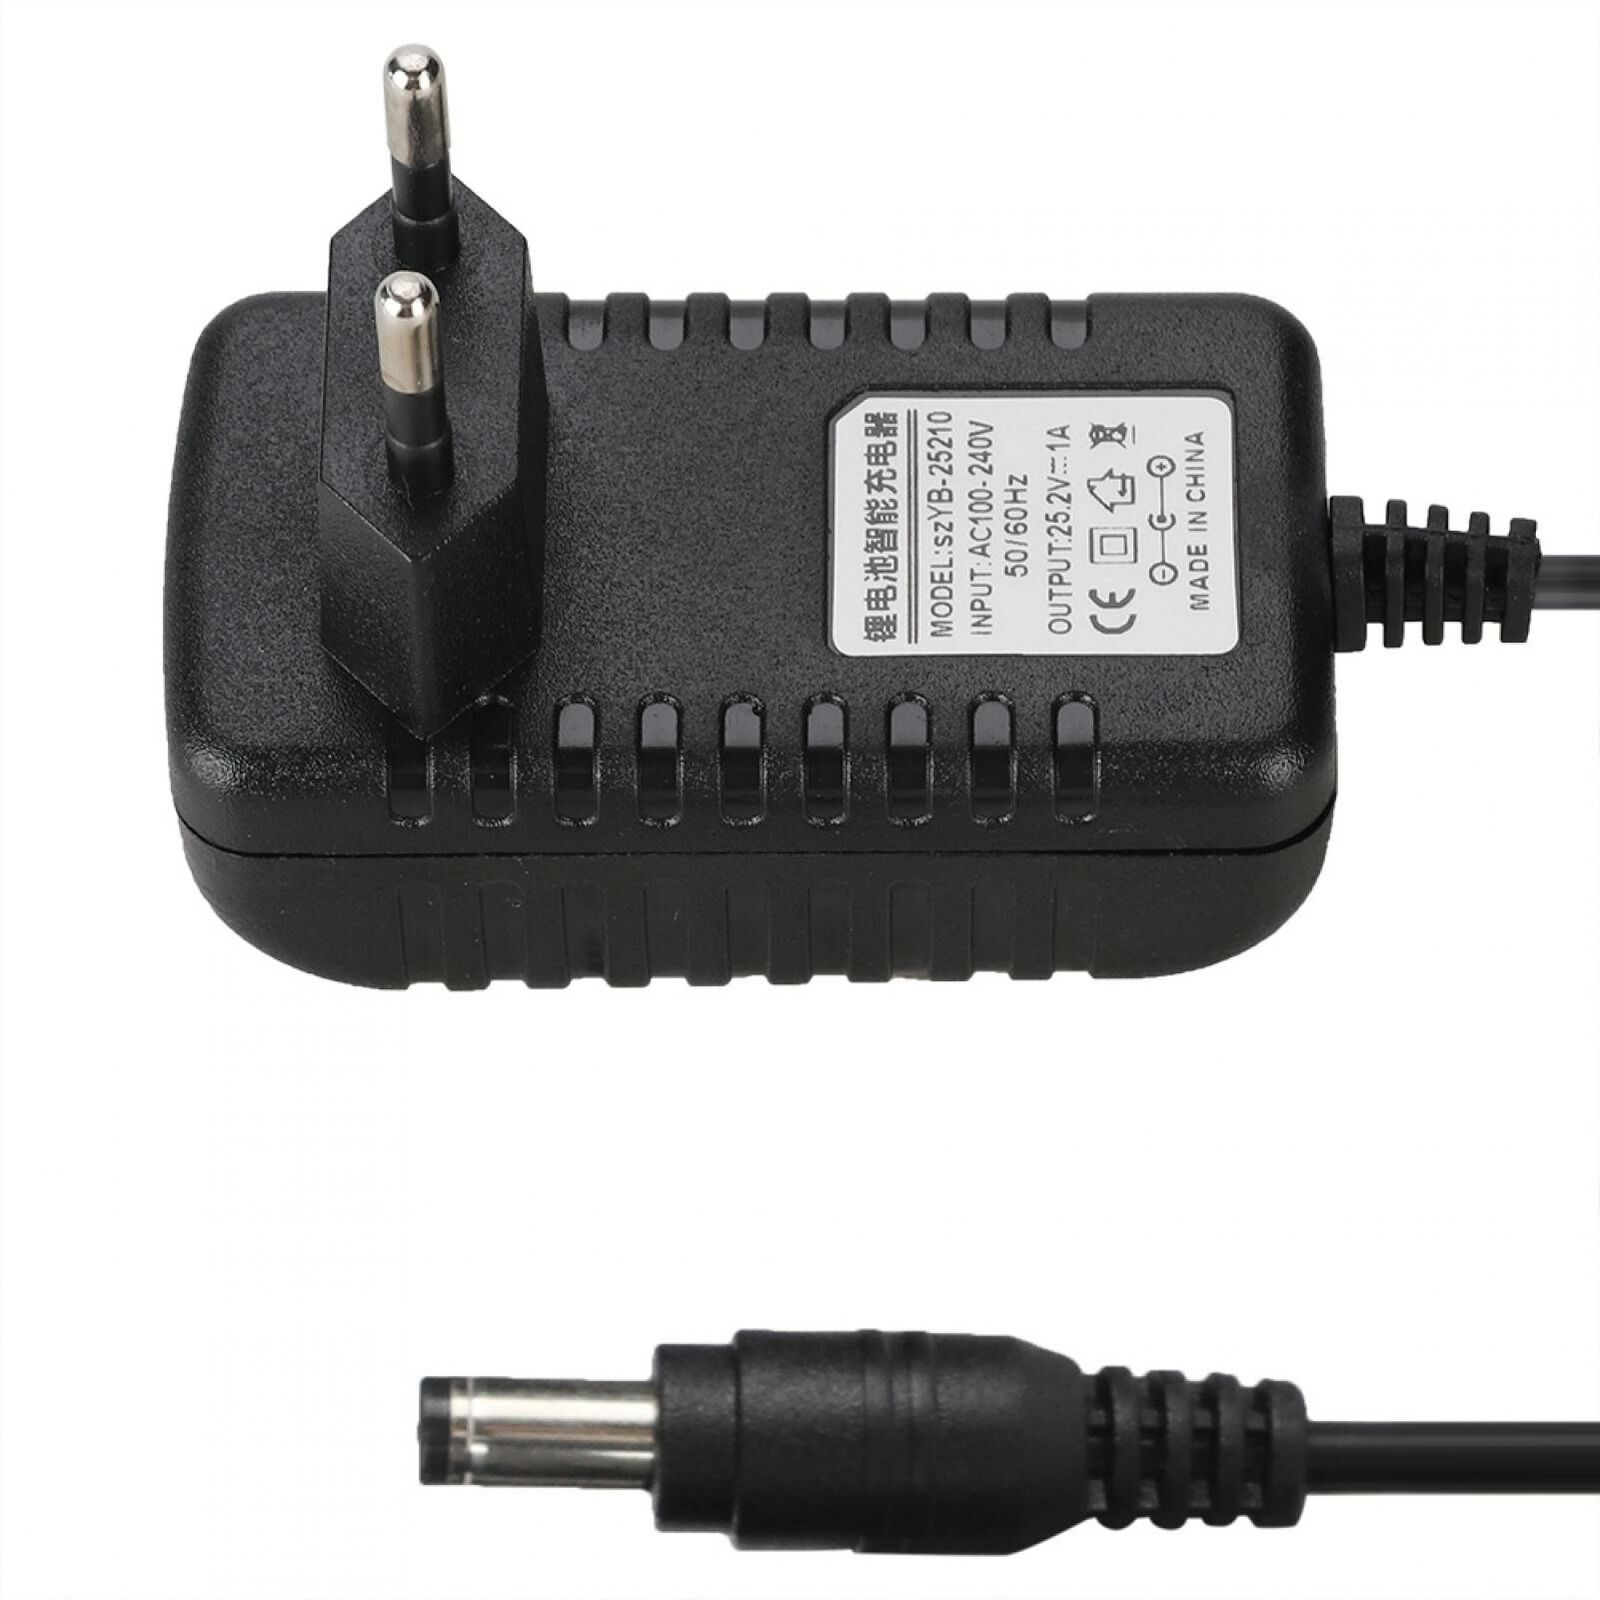 Battery Charger Charger Adapter 25.2V/1A For Balancing Cars Toys For Charging Features: 25.2V/1A he - Click Image to Close